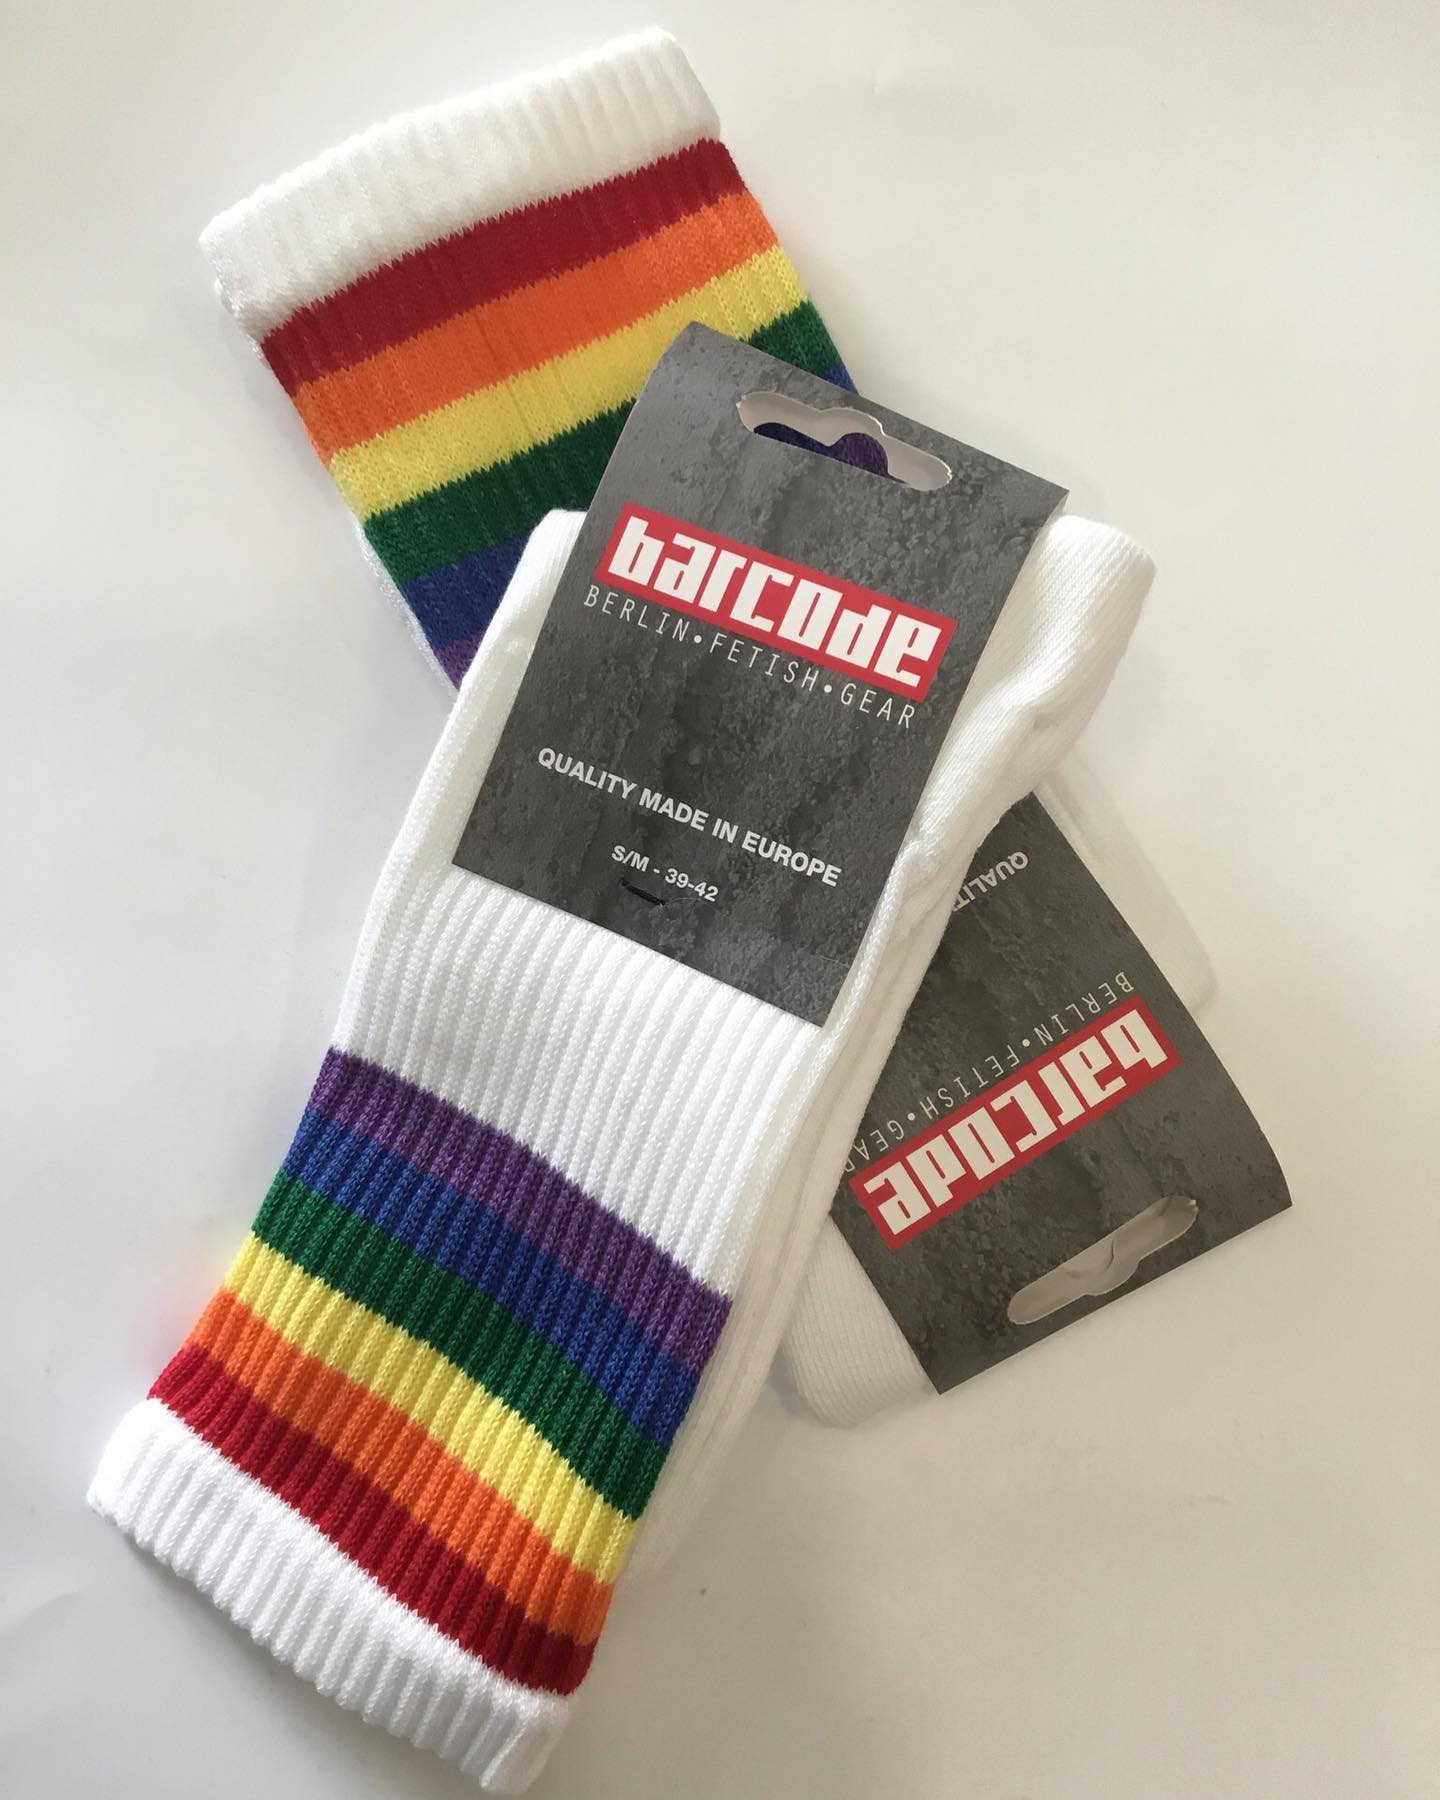 The Pride Socks are made to add a dash of colour and a generous amount of joy to your daily outfit. Available in black or white and in two lengths:
____
https://menandunderwear.com/shop/module/iqitsearch/searchiqit?s=Barcode+Pride+Socks